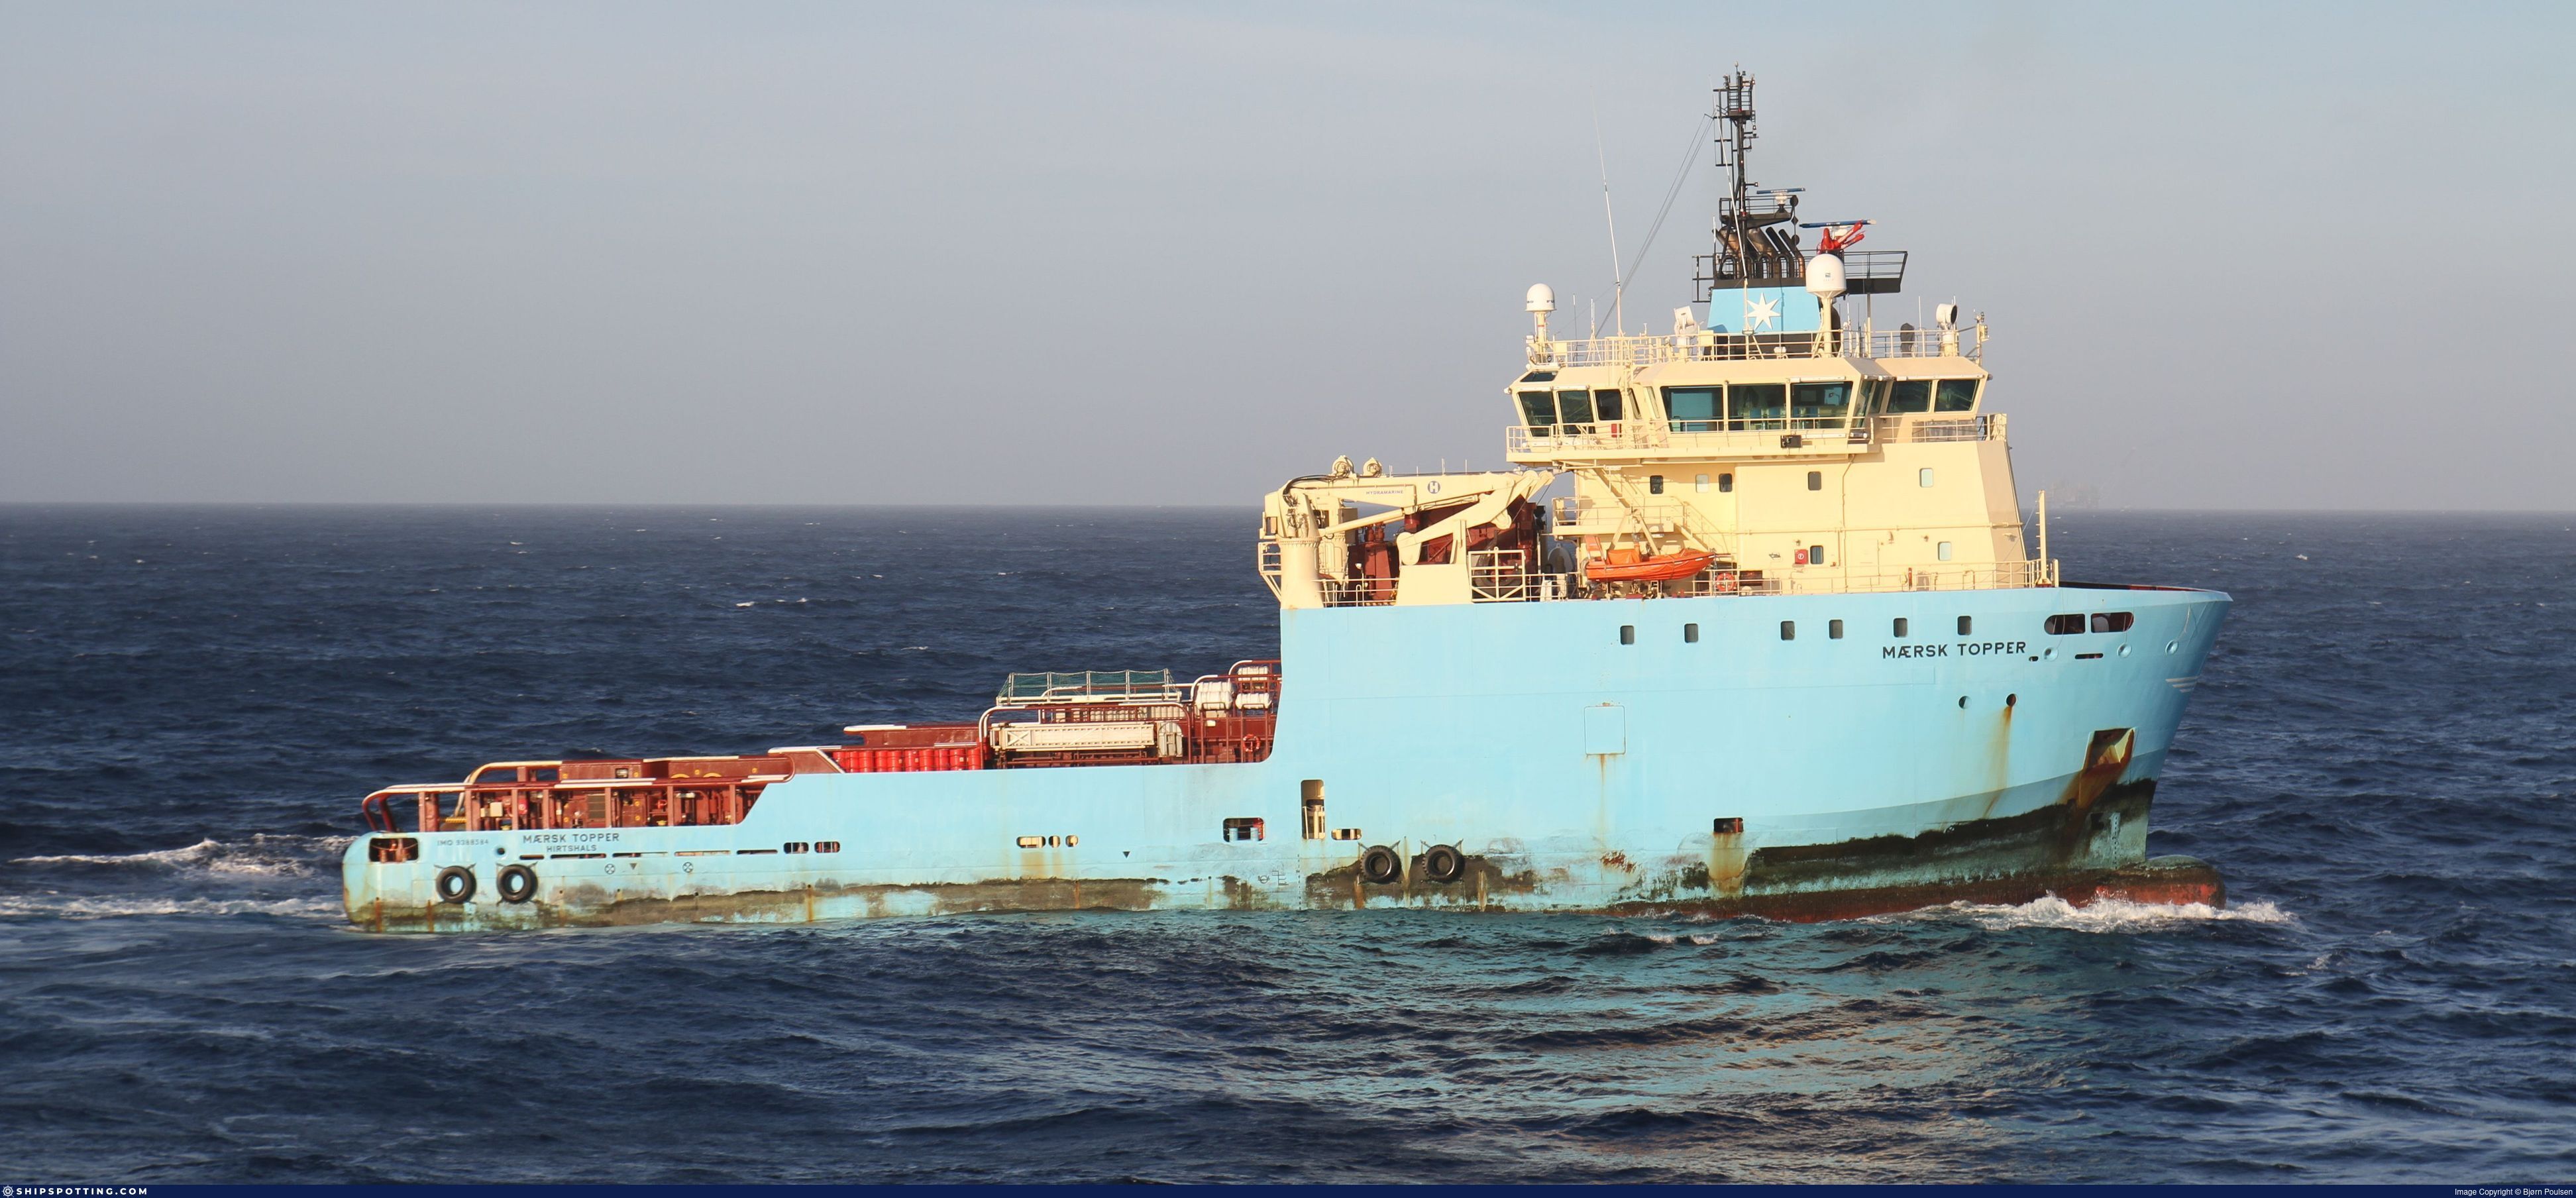 MAERSK TOPPER - IMO 9388584 - ShipSpotting.com - Ship Photos, Information,  Videos and Ship Tracker